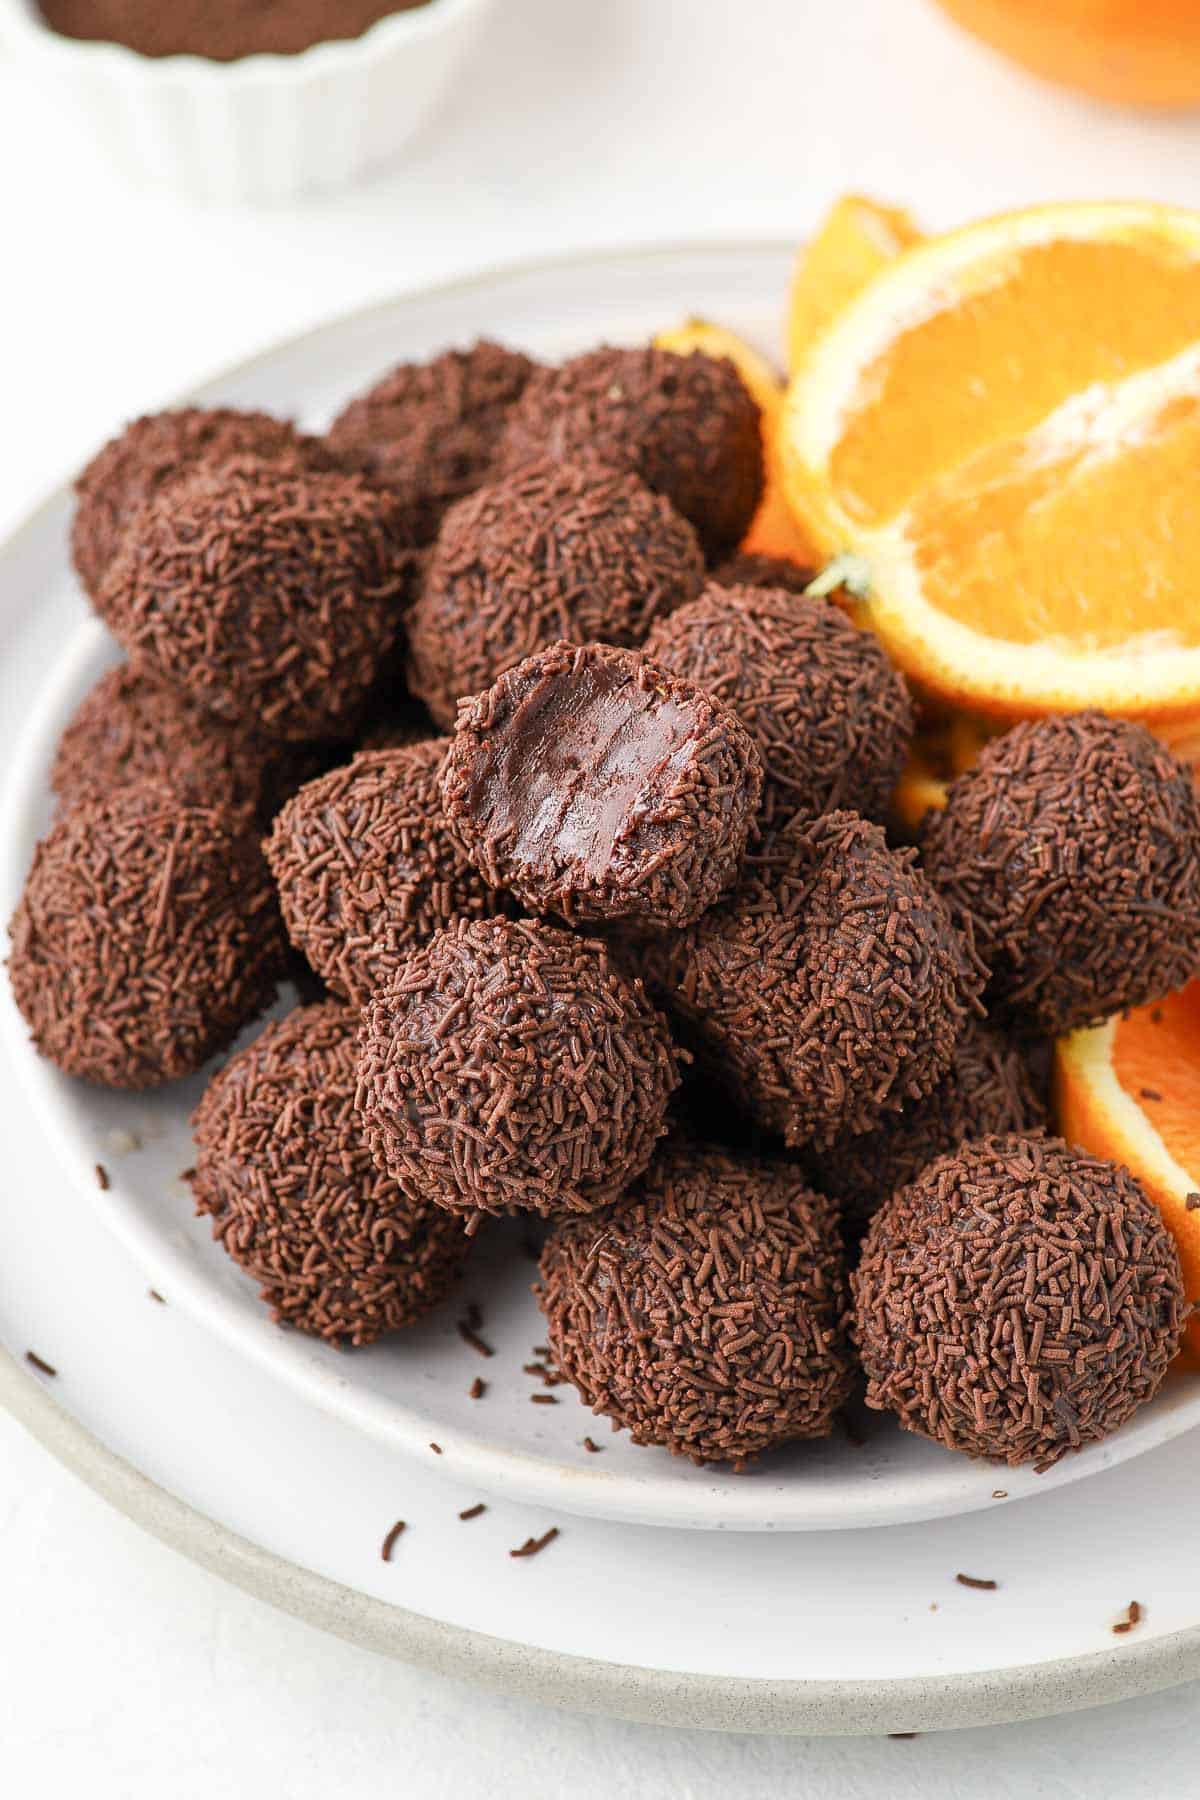 Plate of truffles, garnished with some orange slices, and one truffle missing a bite.